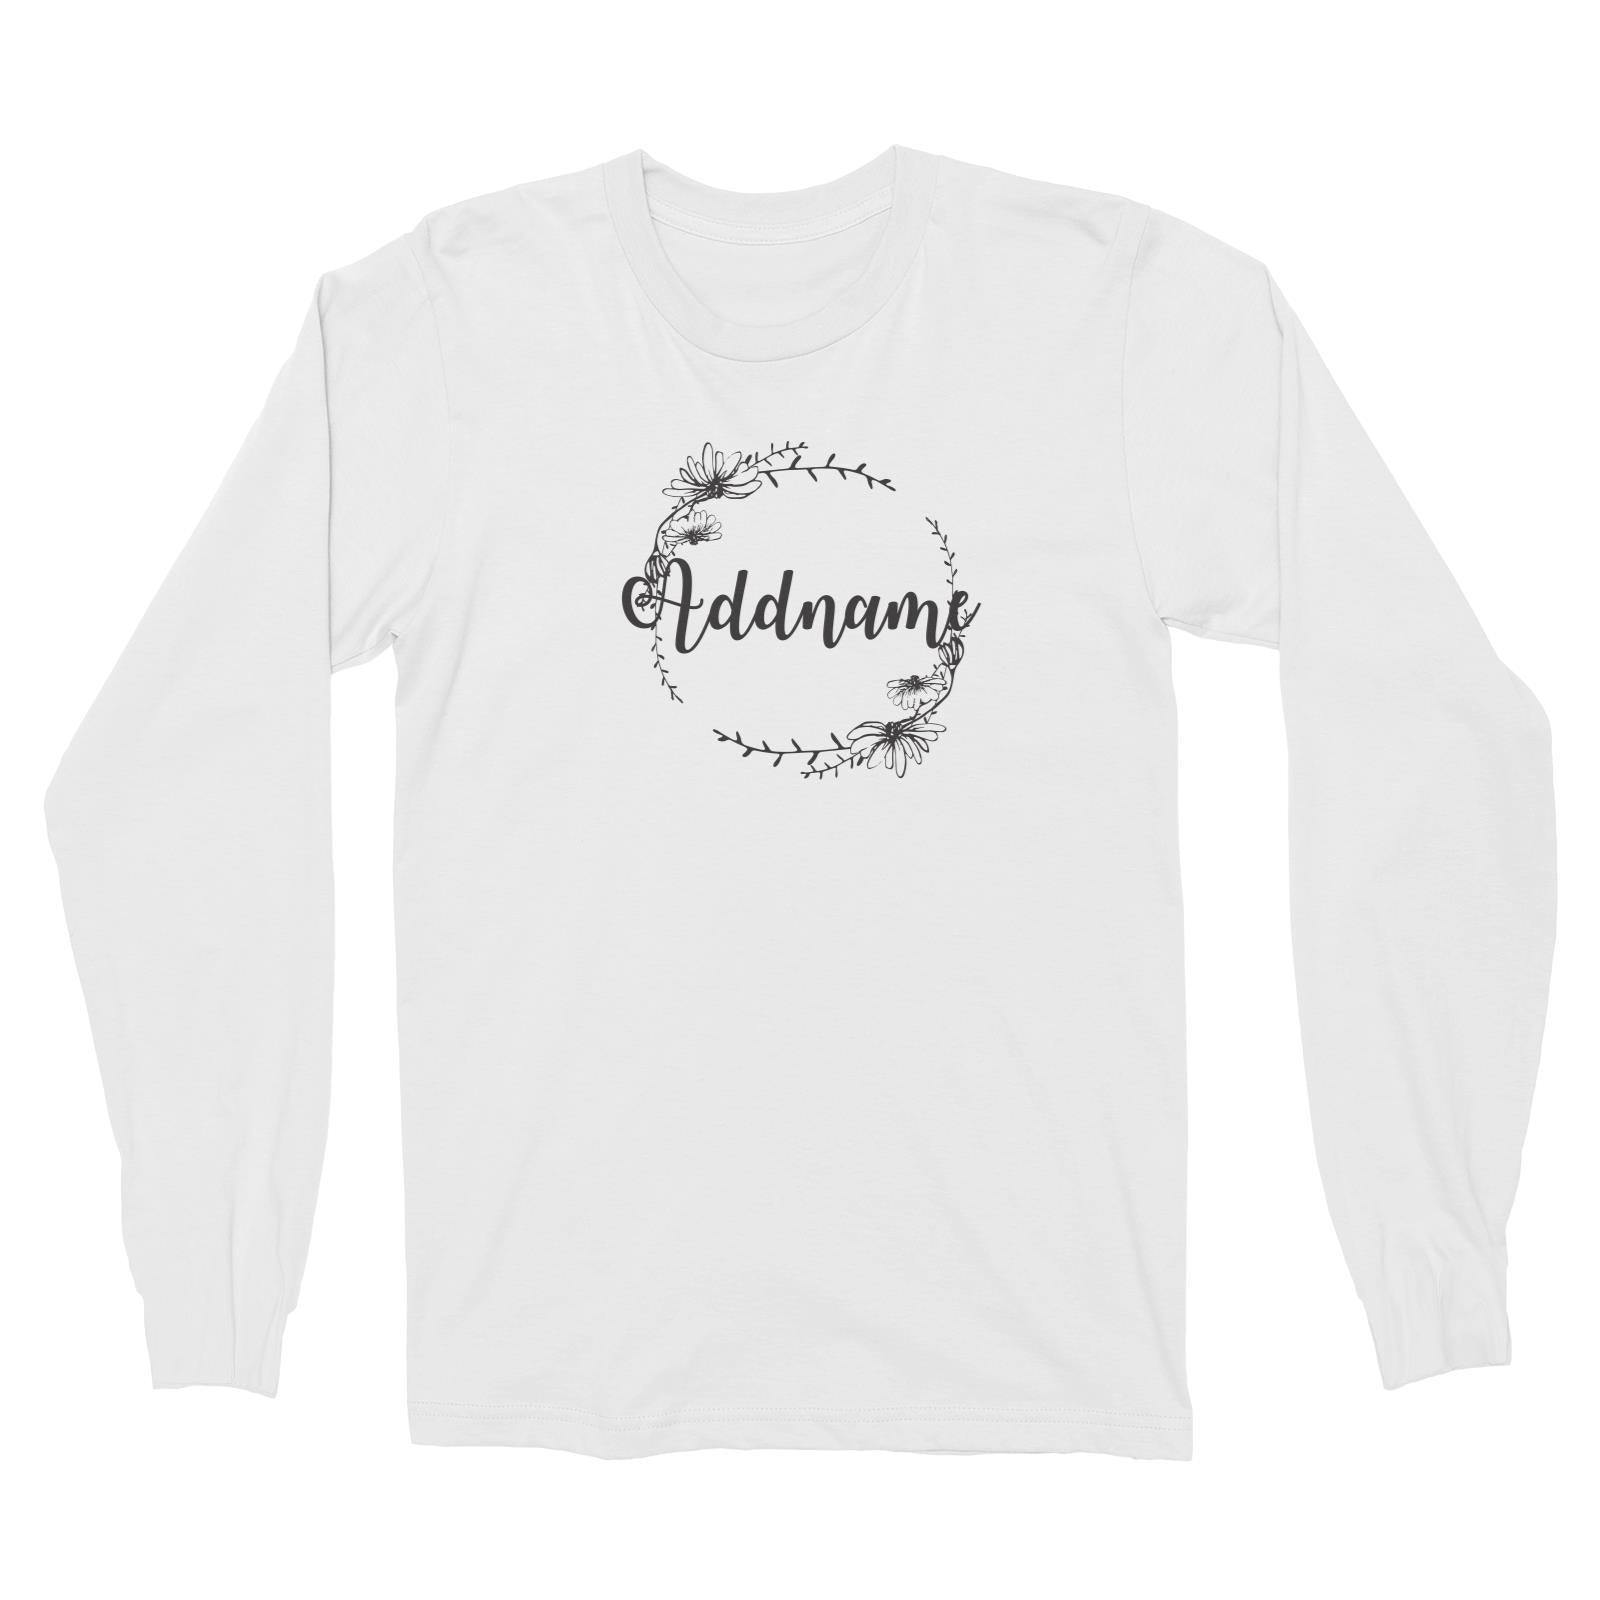 Bridesmaid Monochrome Floral and Leaves Wreath Addname Long Sleeve Unisex T-Shirt